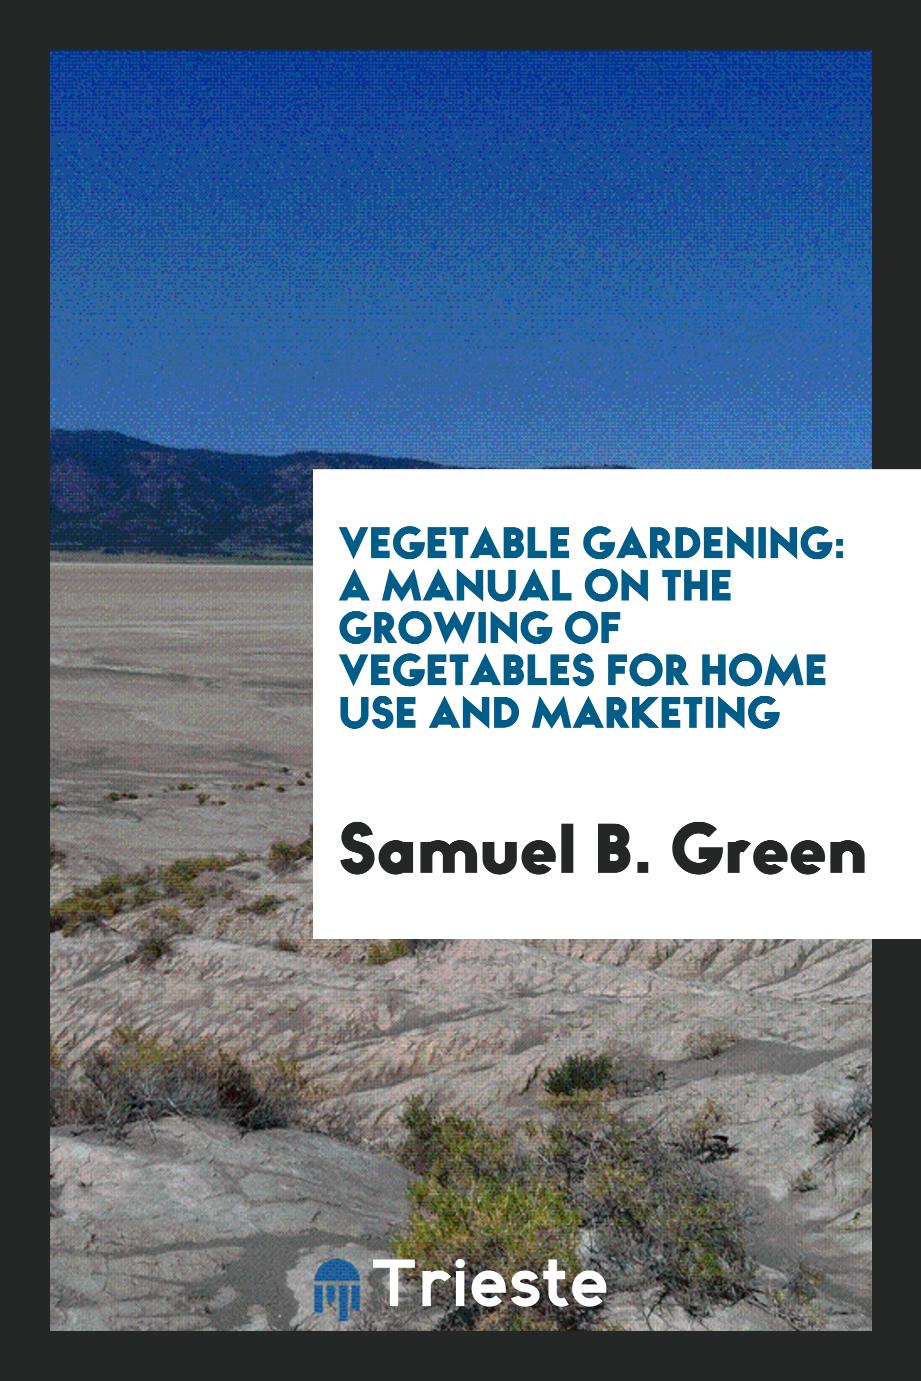 Vegetable gardening: a manual on the growing of vegetables for home use and marketing